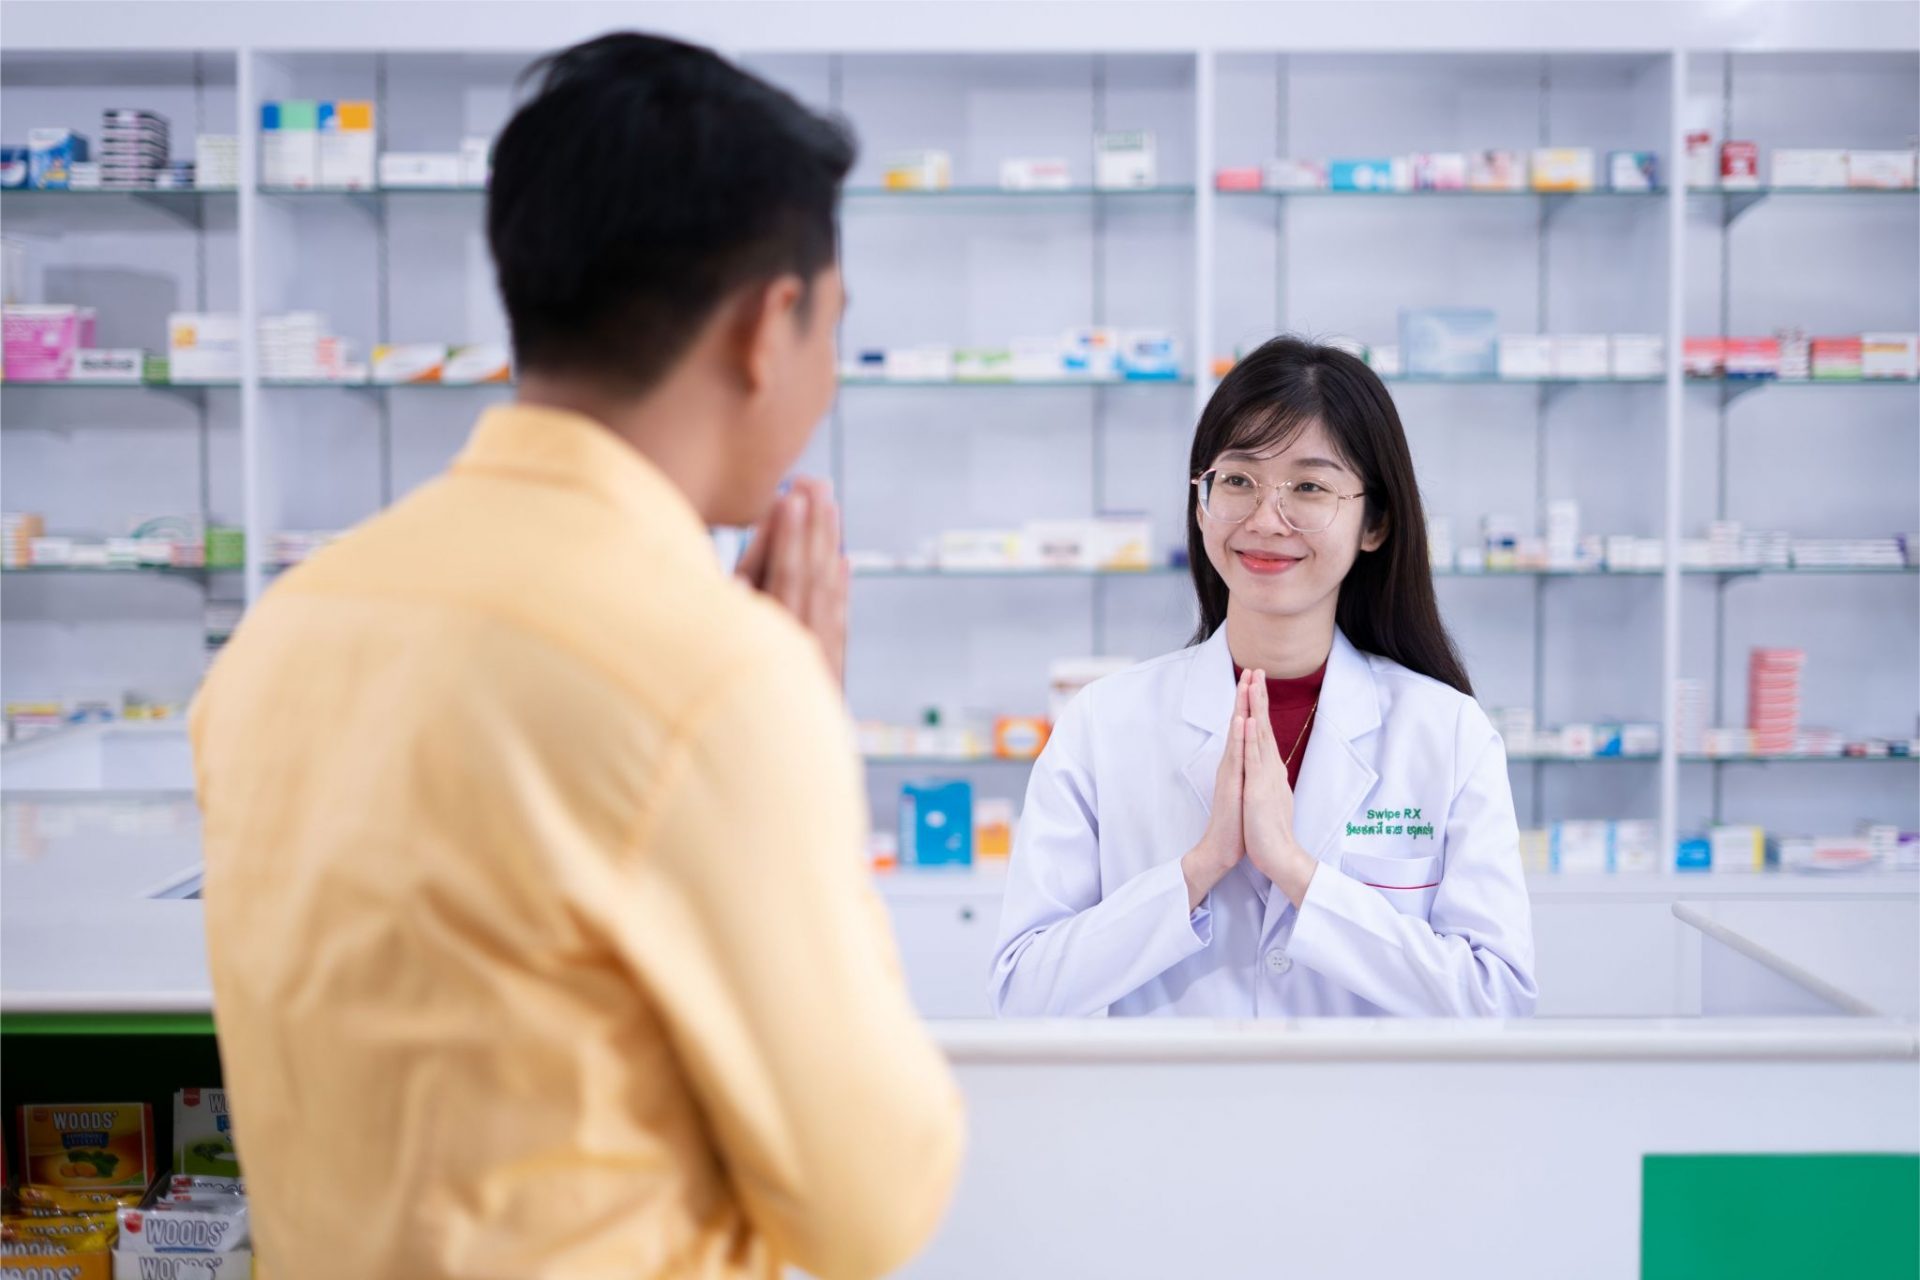 Daily Markup #527: SwipeRx uplifts pharmacists in Cambodia; Prenetics enables online & offline testing; Homage crosses 1M hours of care in Malaysia